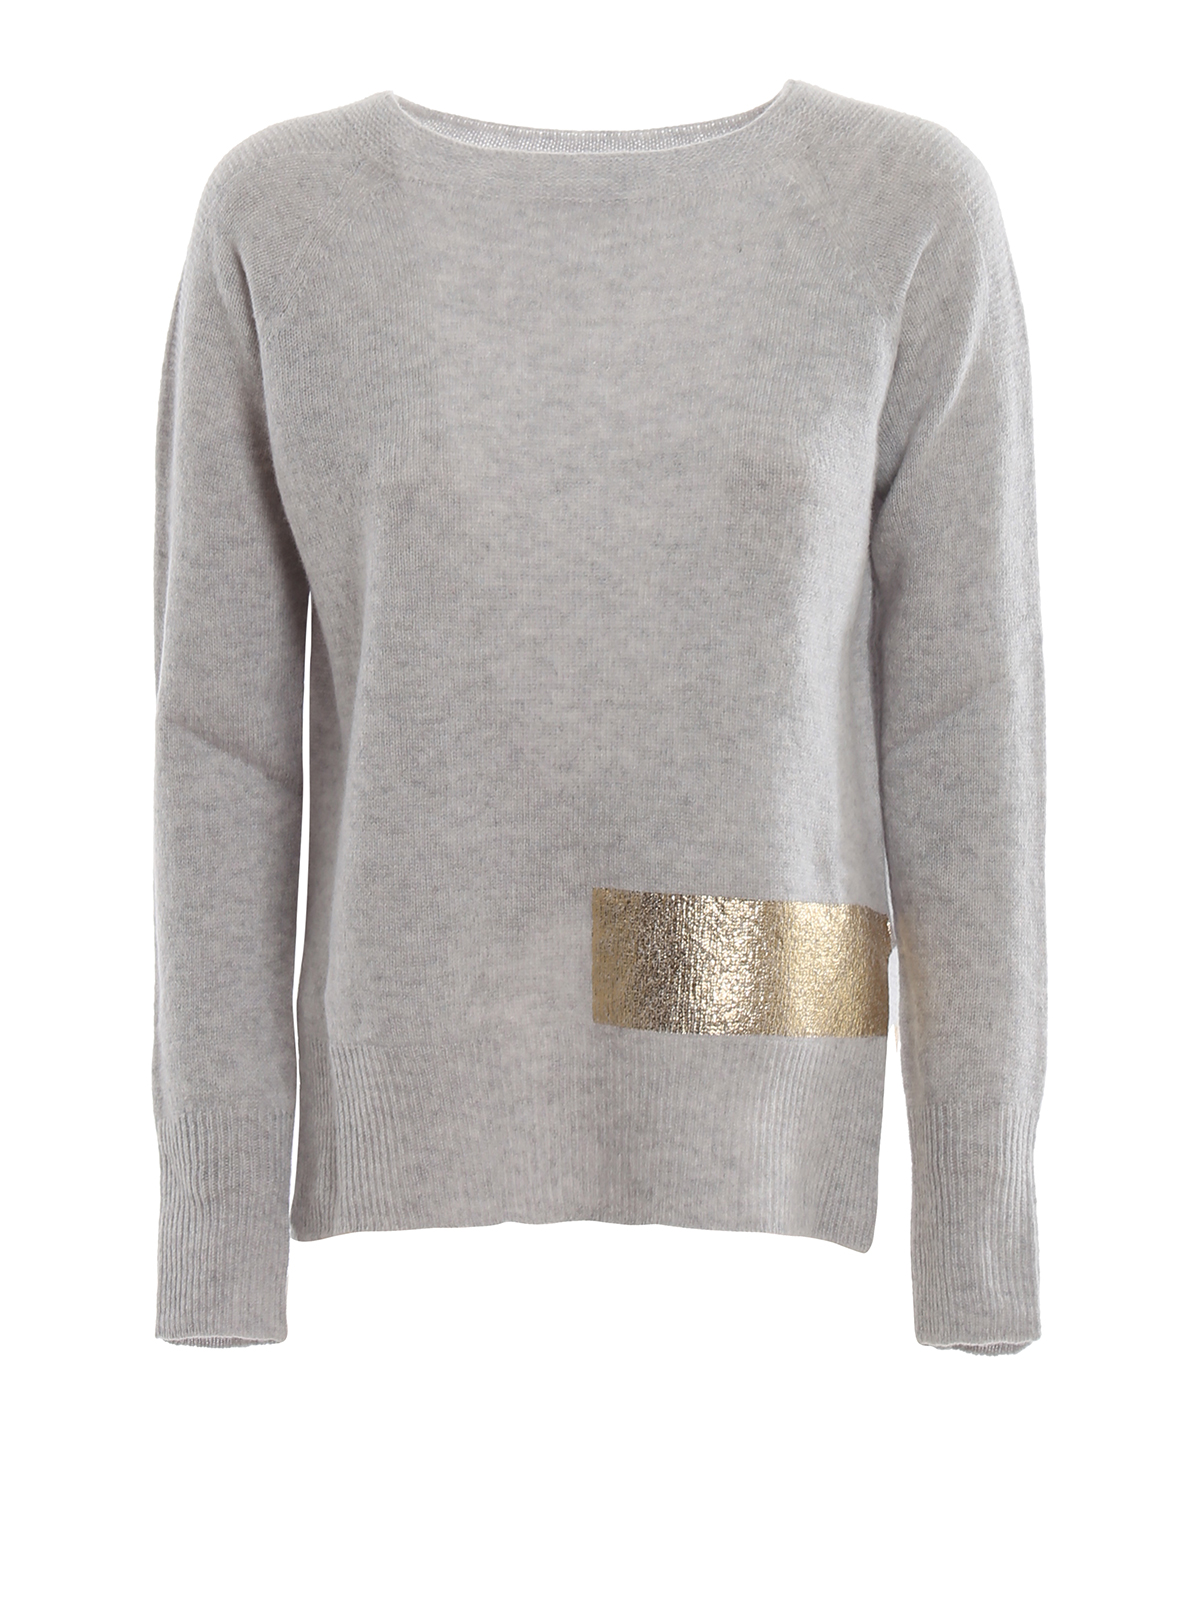 PINKO GIAPPONESE WOOL AND CASHMERE SWEATER